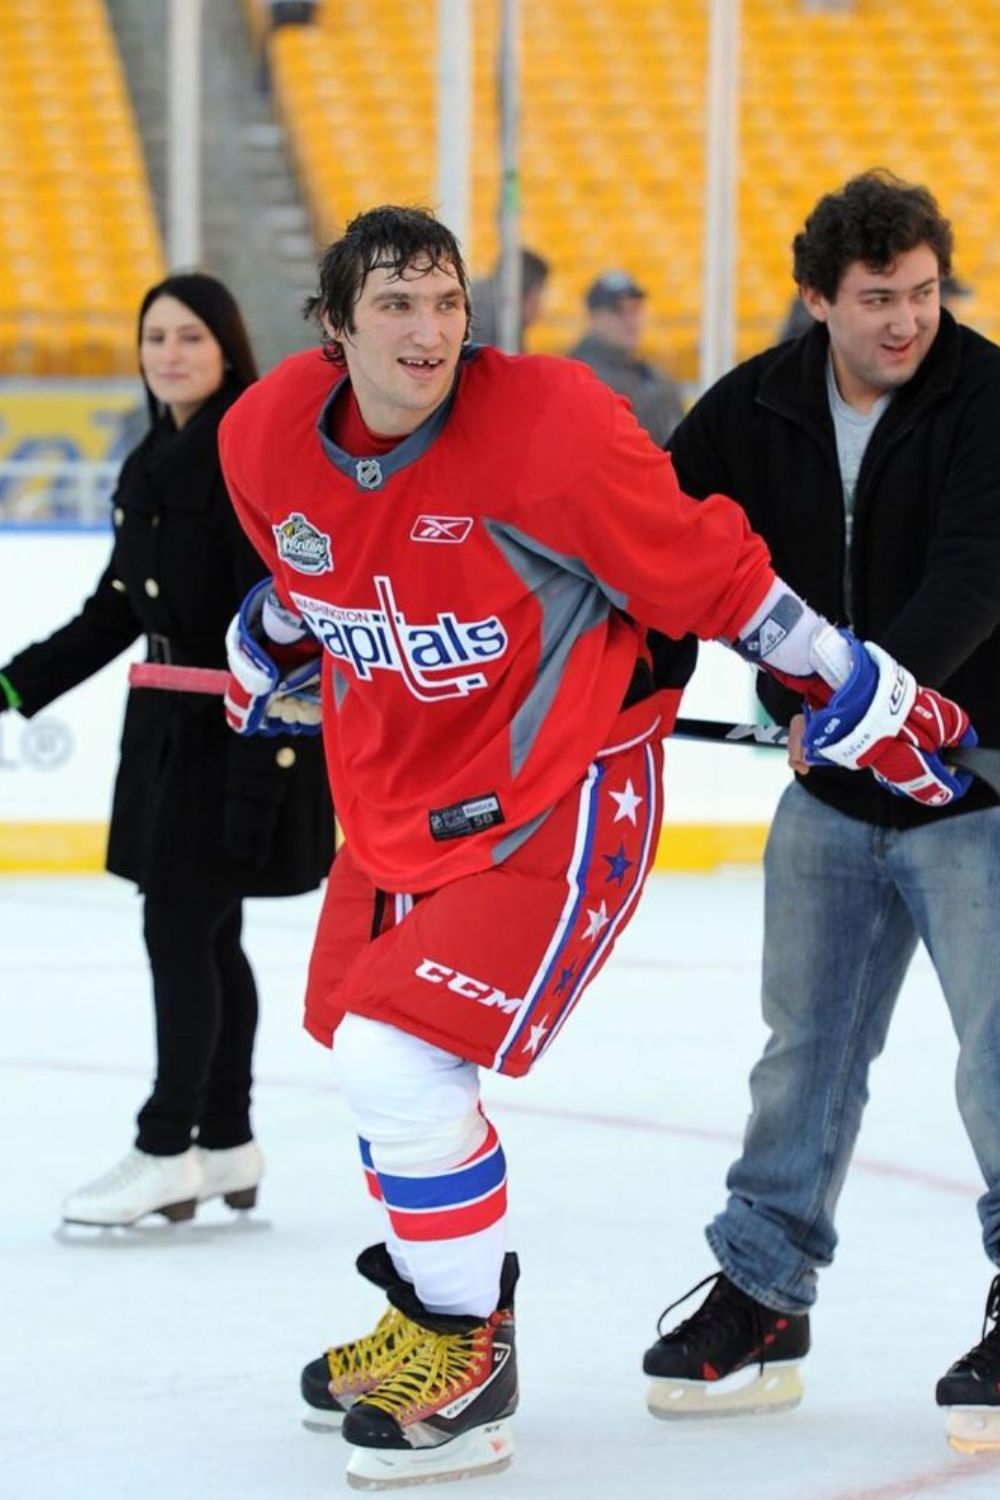 Alex Ovechkin And His Brother Mikhael Ovechkin At The Rink (Source: RMNB)